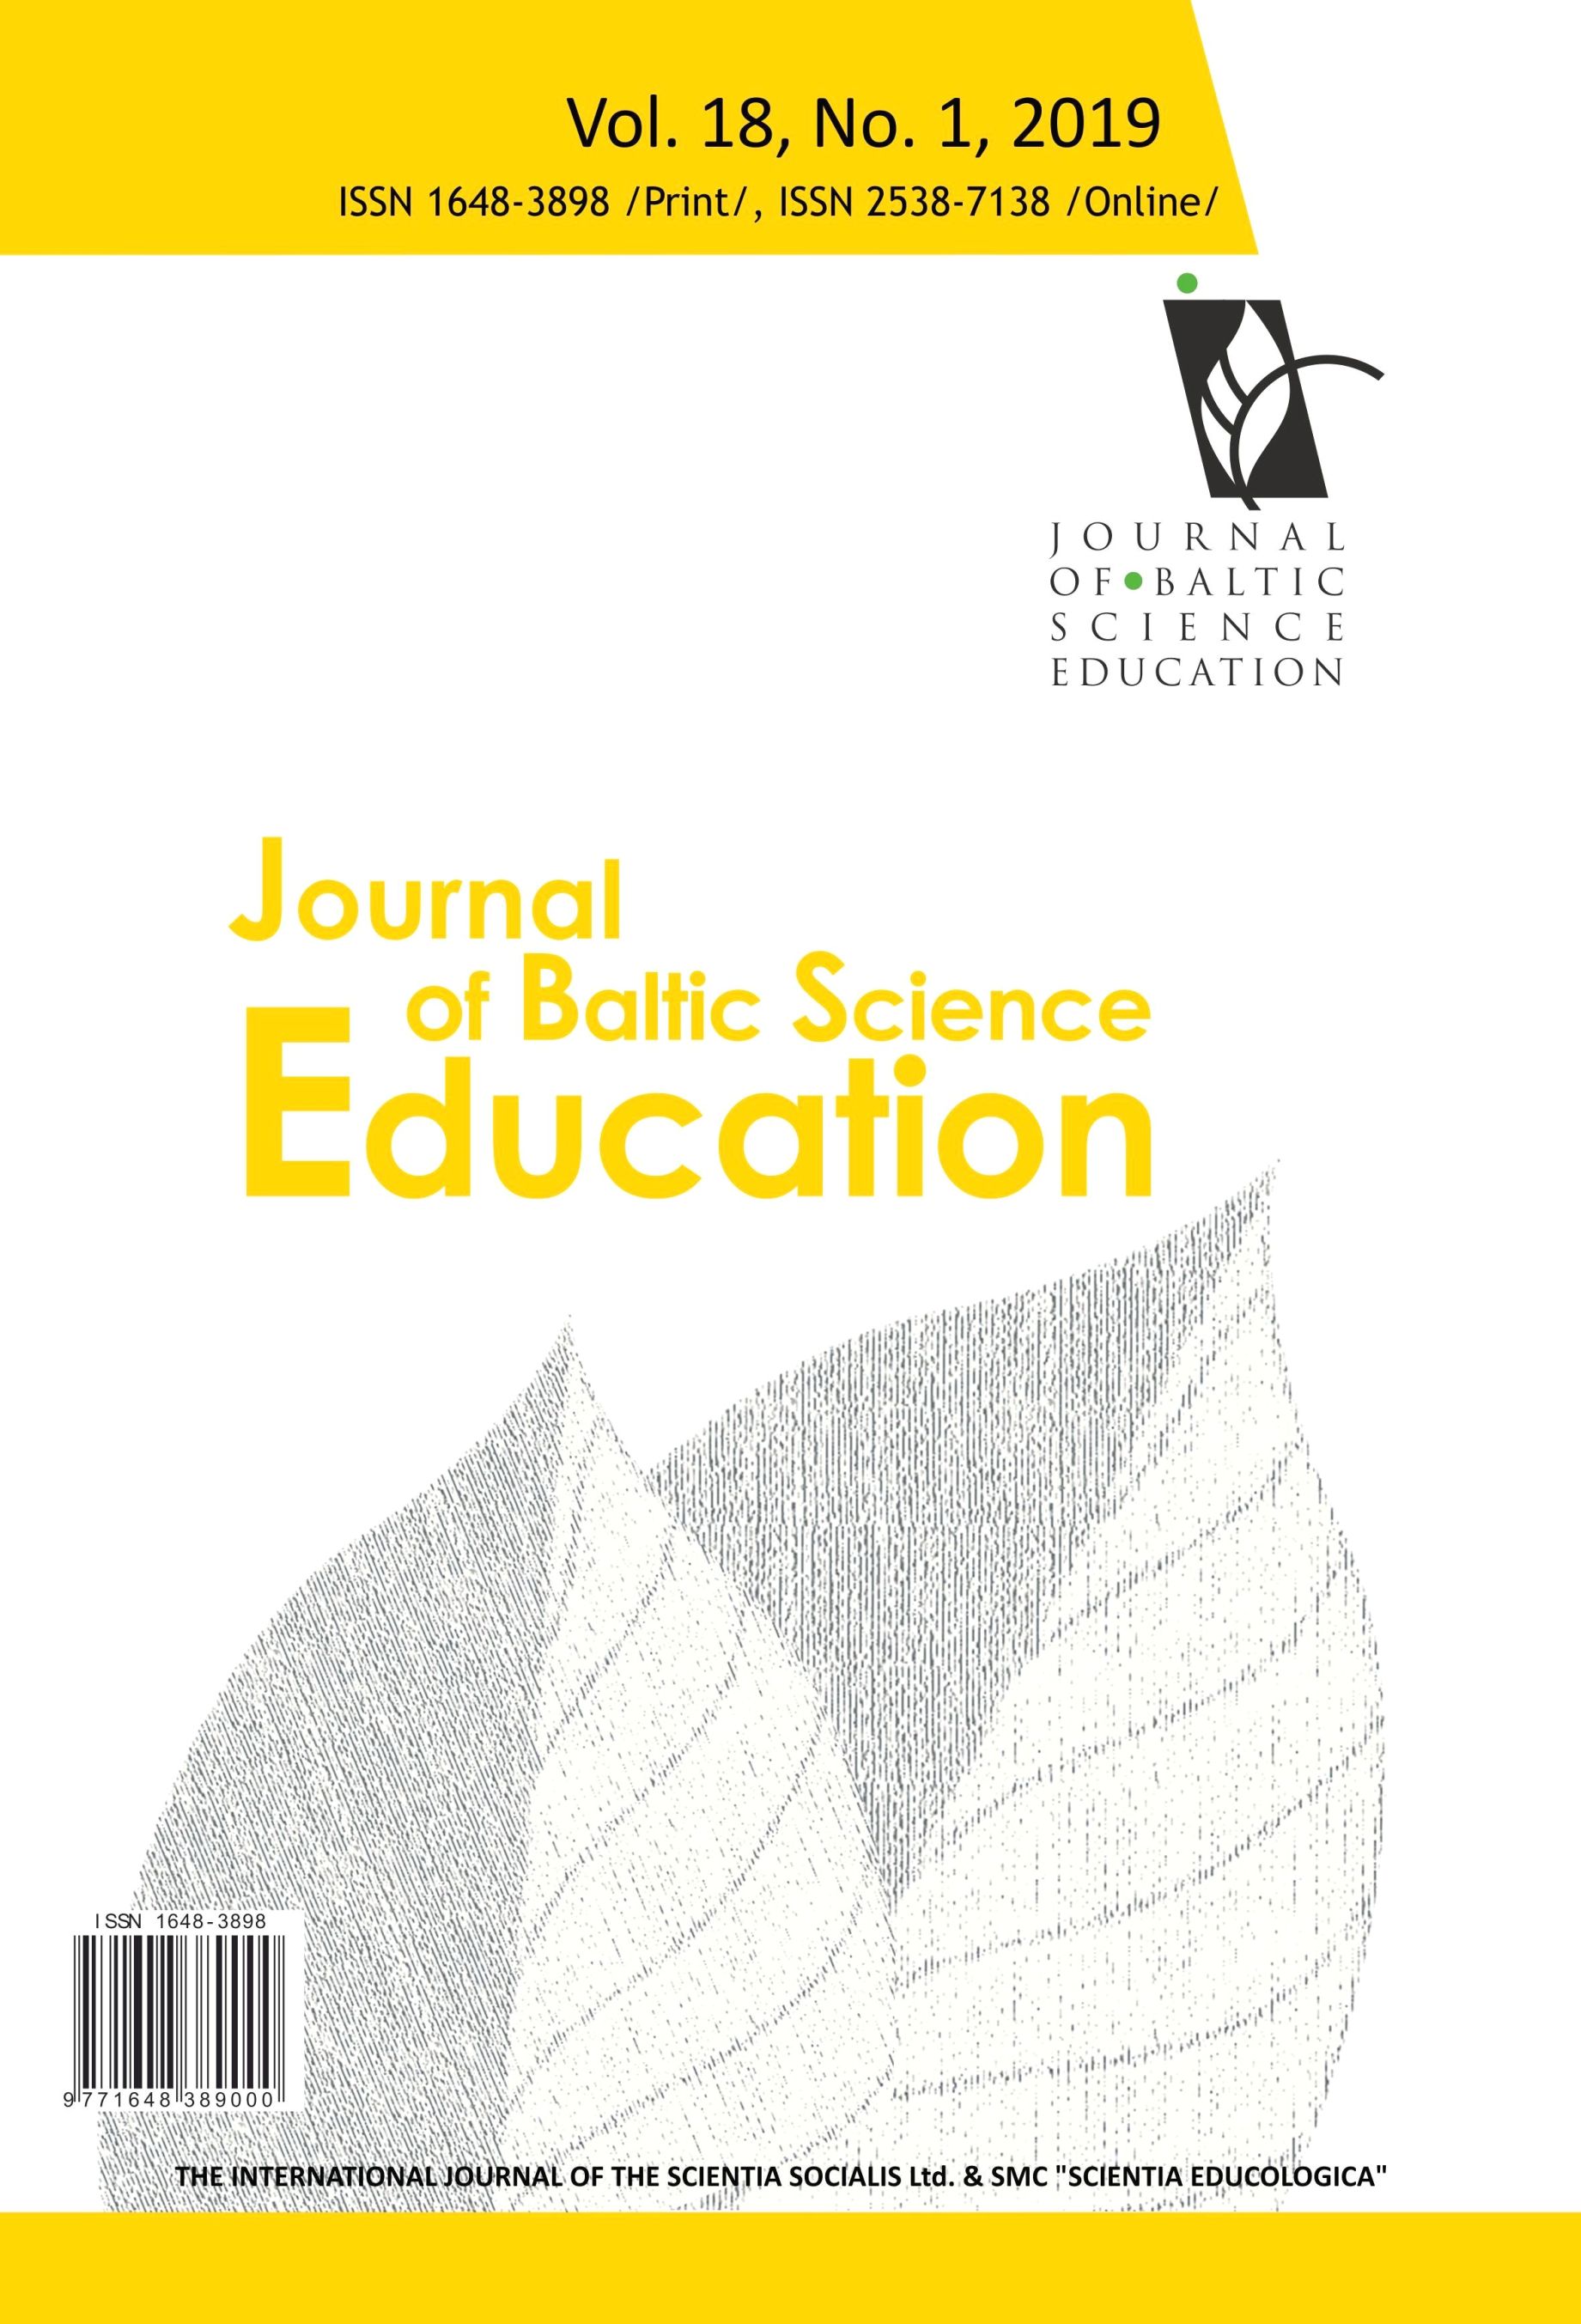 PROPOSALS FOR SMALL STEPS TOWARD REPRODUCIBILITY OF SCIENCE EDUCATIONAL STUDIES Cover Image